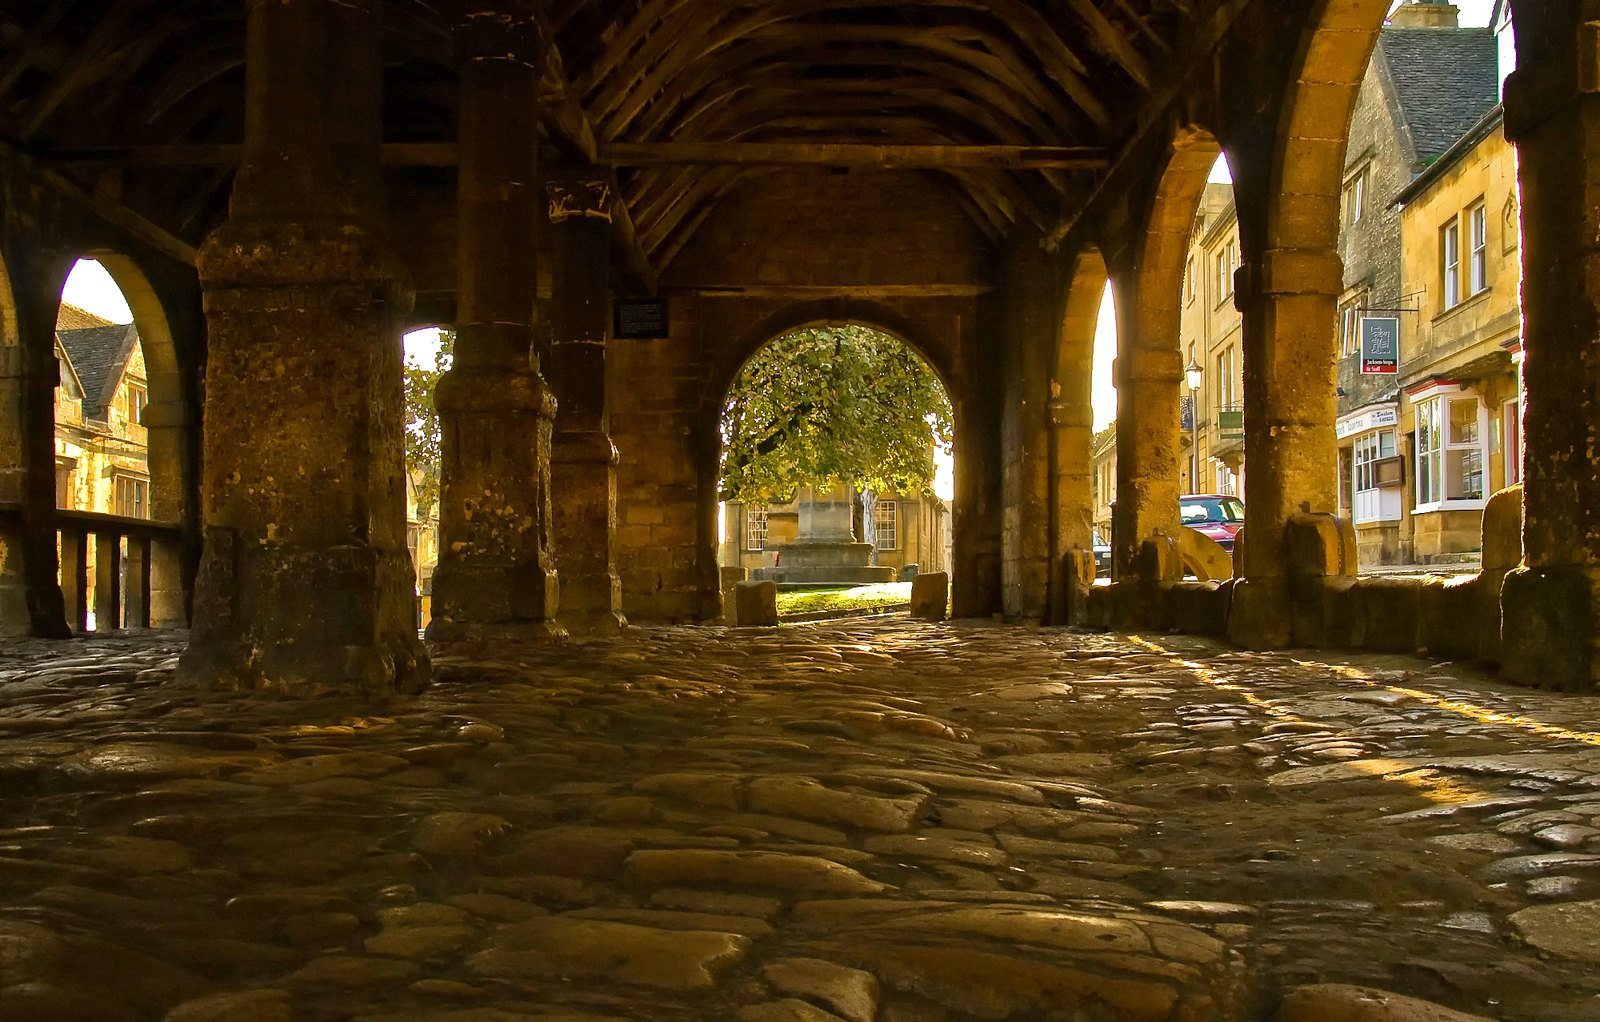 The cobbled floor of the 17th century Market Hall in Chipping Campden, Gloucestershire. Credit Anguskirk